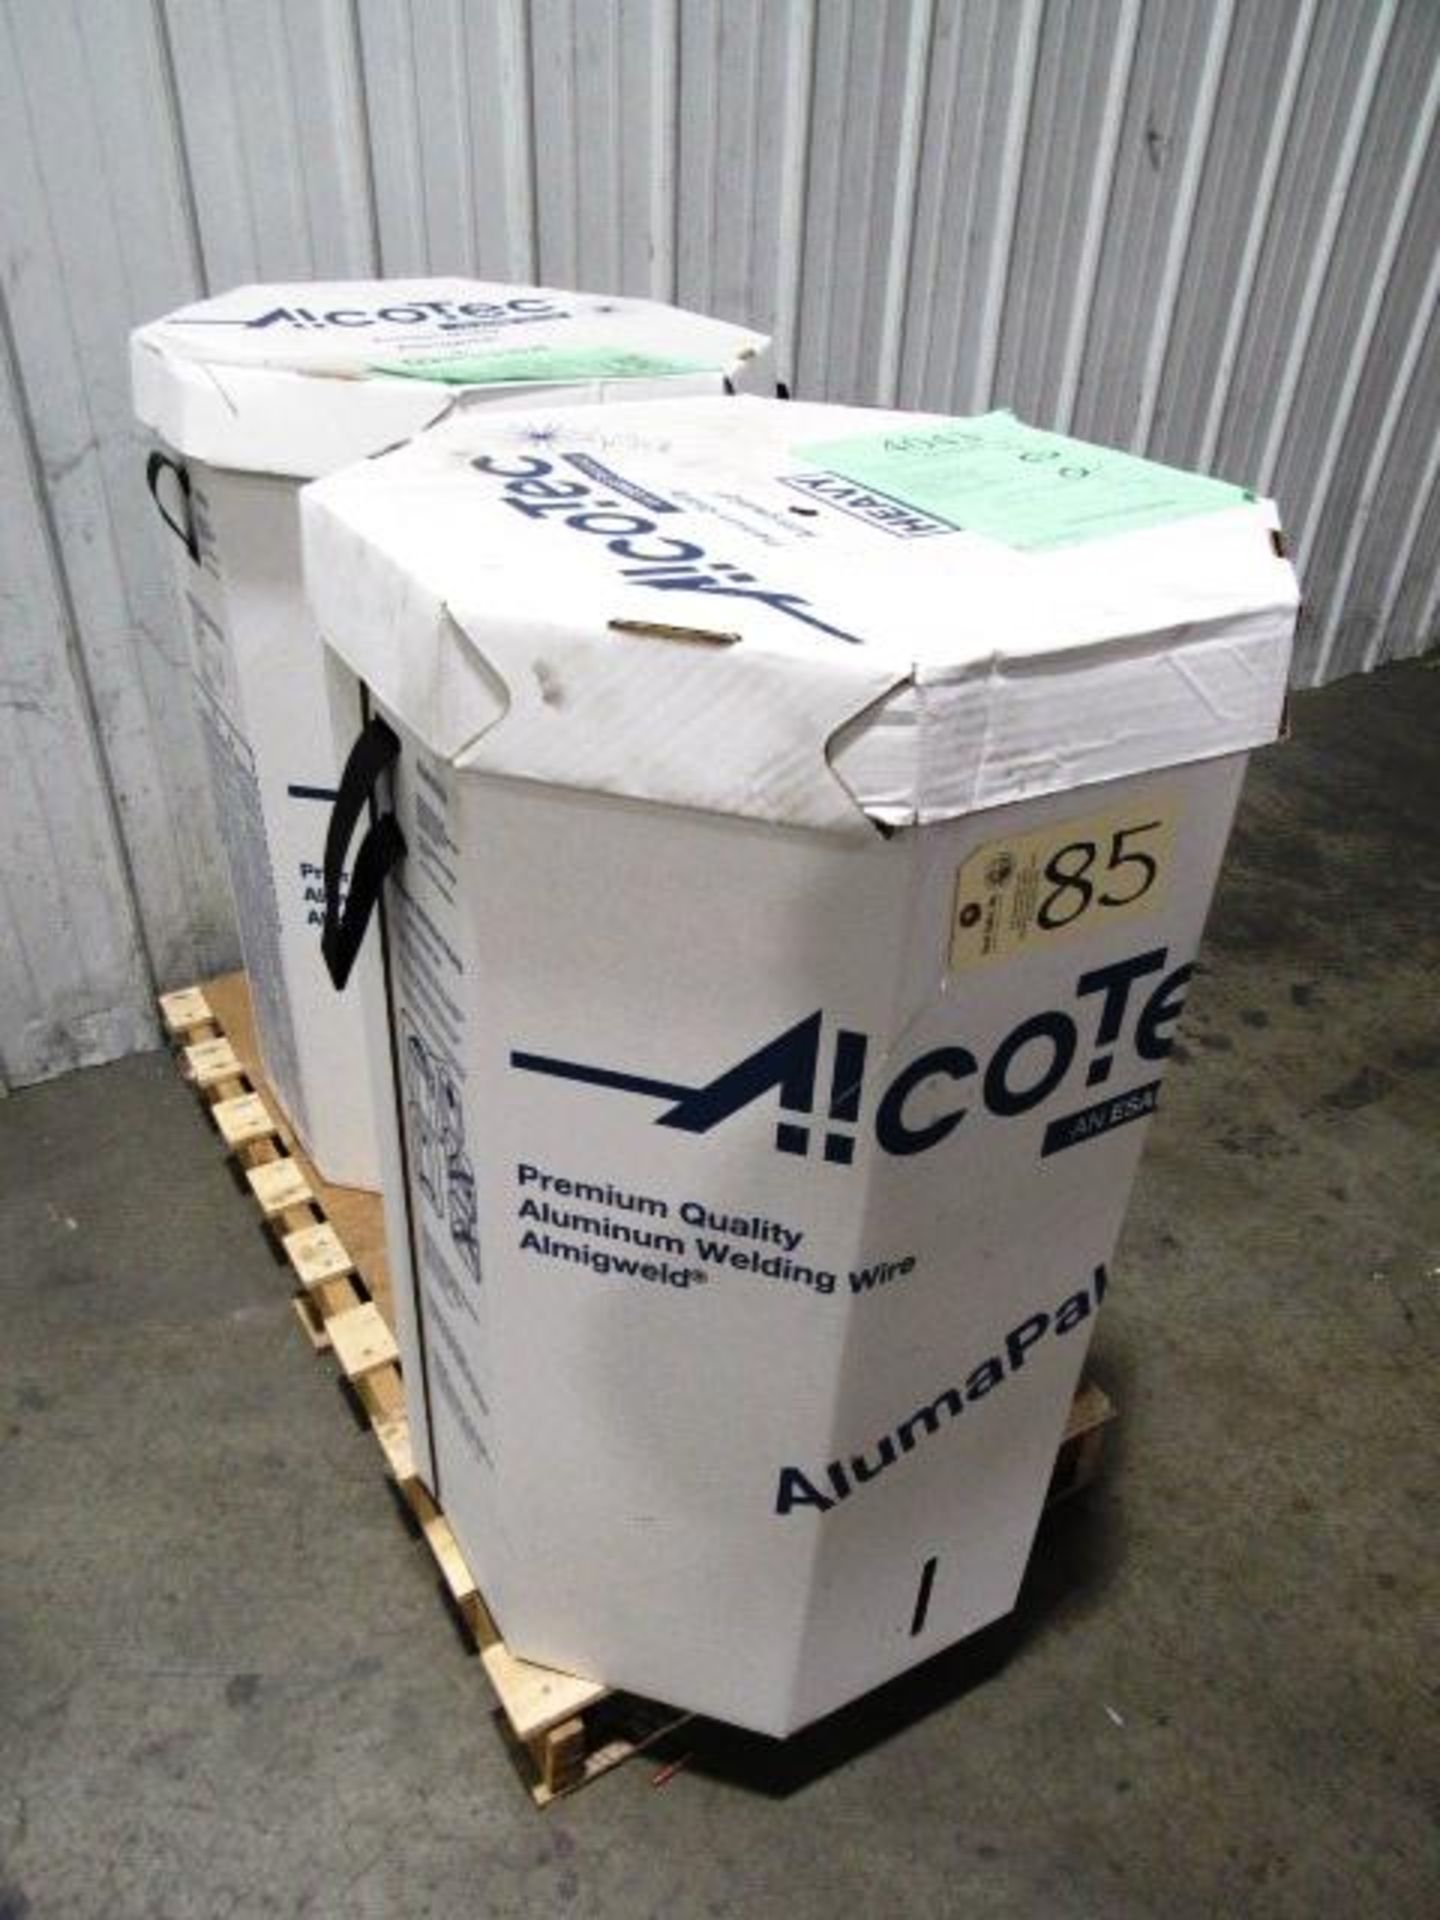 (2) Boxes of Esab Alcotec ER4043 Robot / Welding Wire